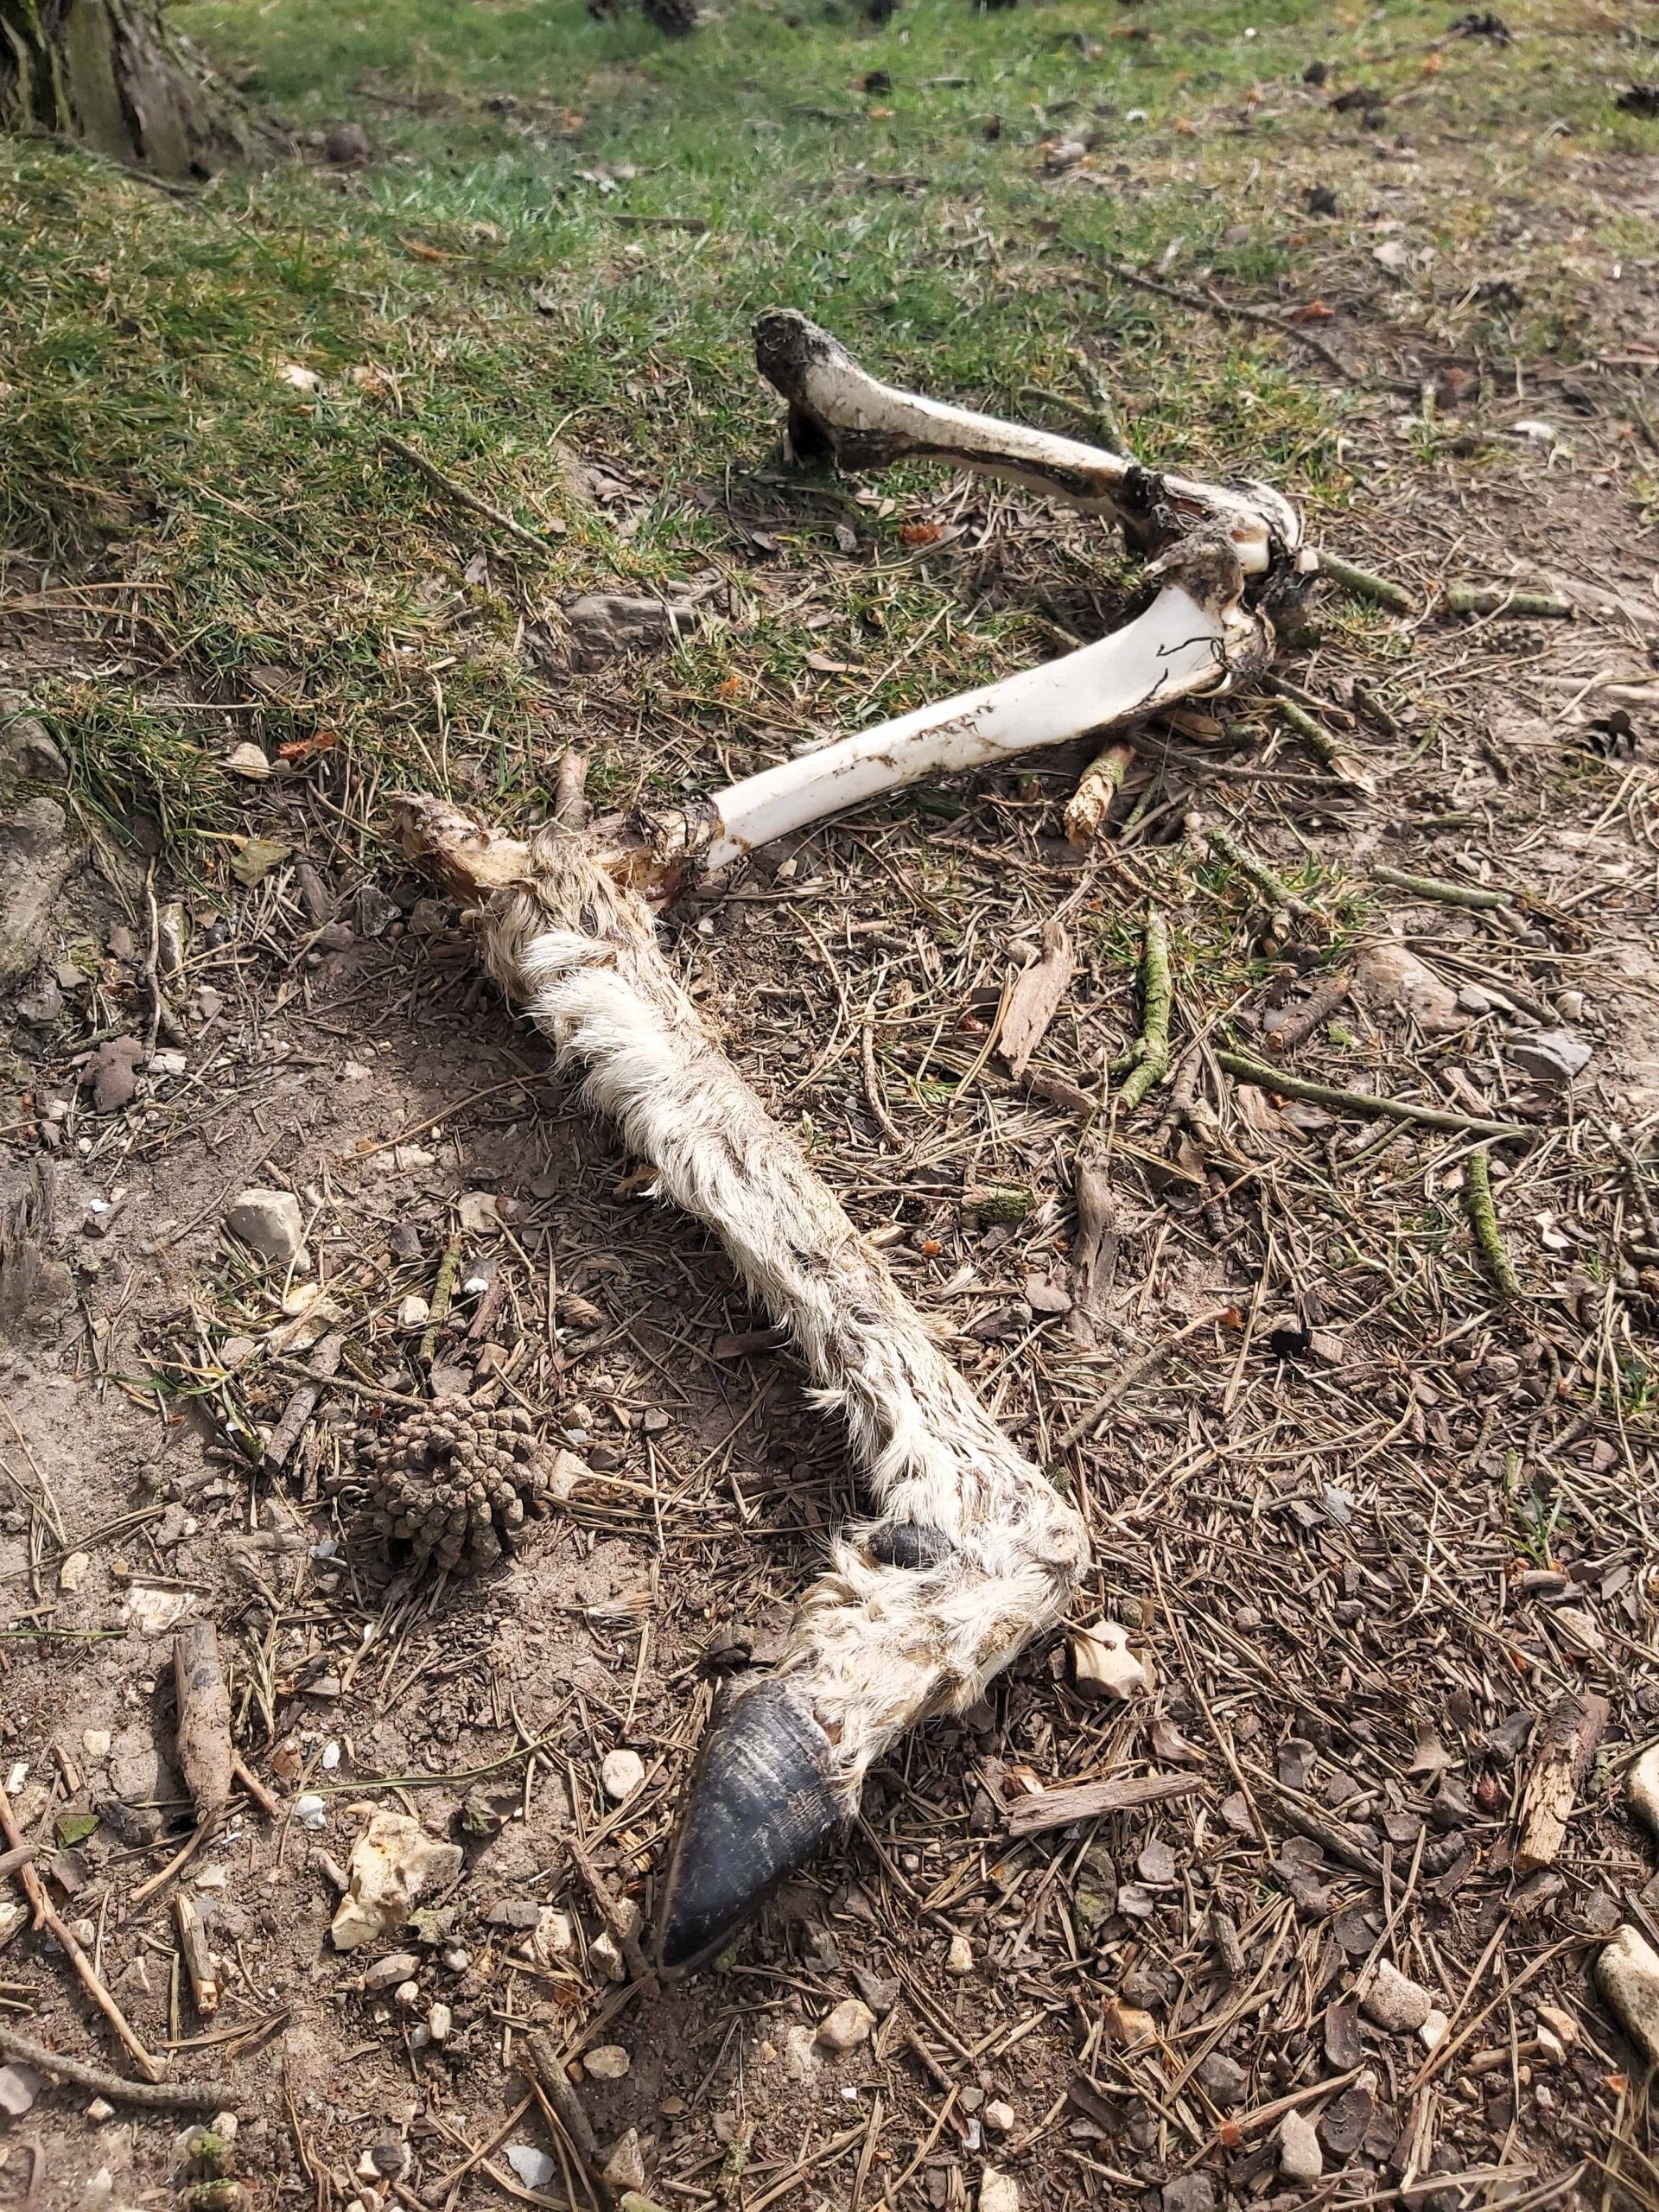 A half eaten deer leg found by Wandering Lewis in the New Forest, England.